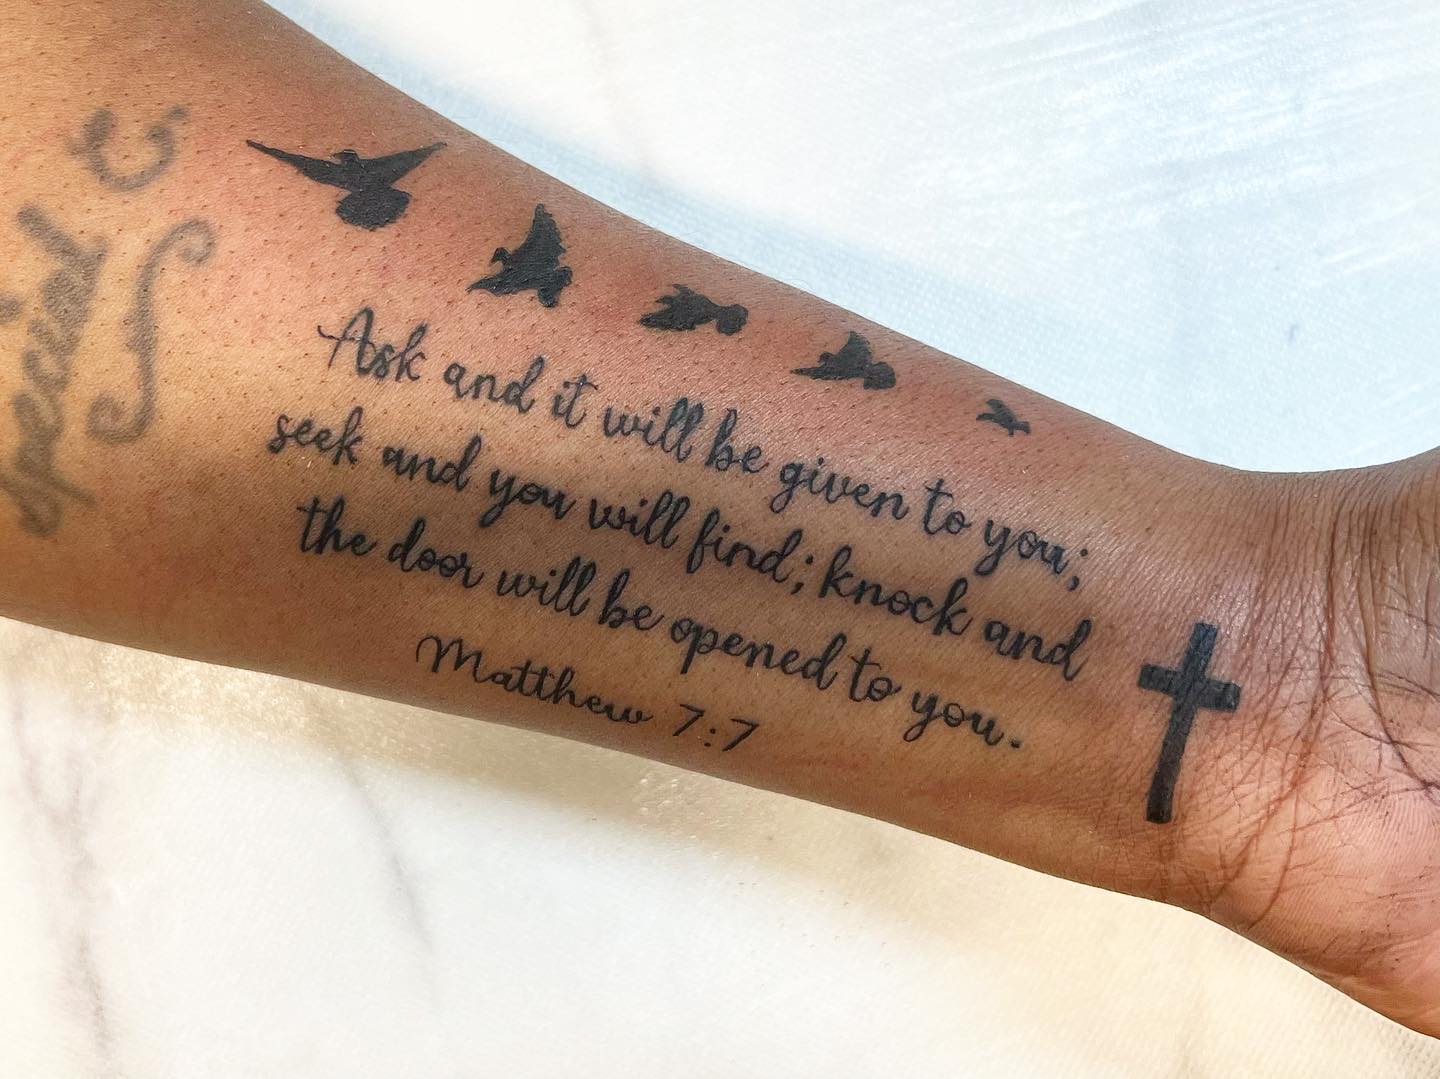 37 Bible Verse About Tattoos And Piercings